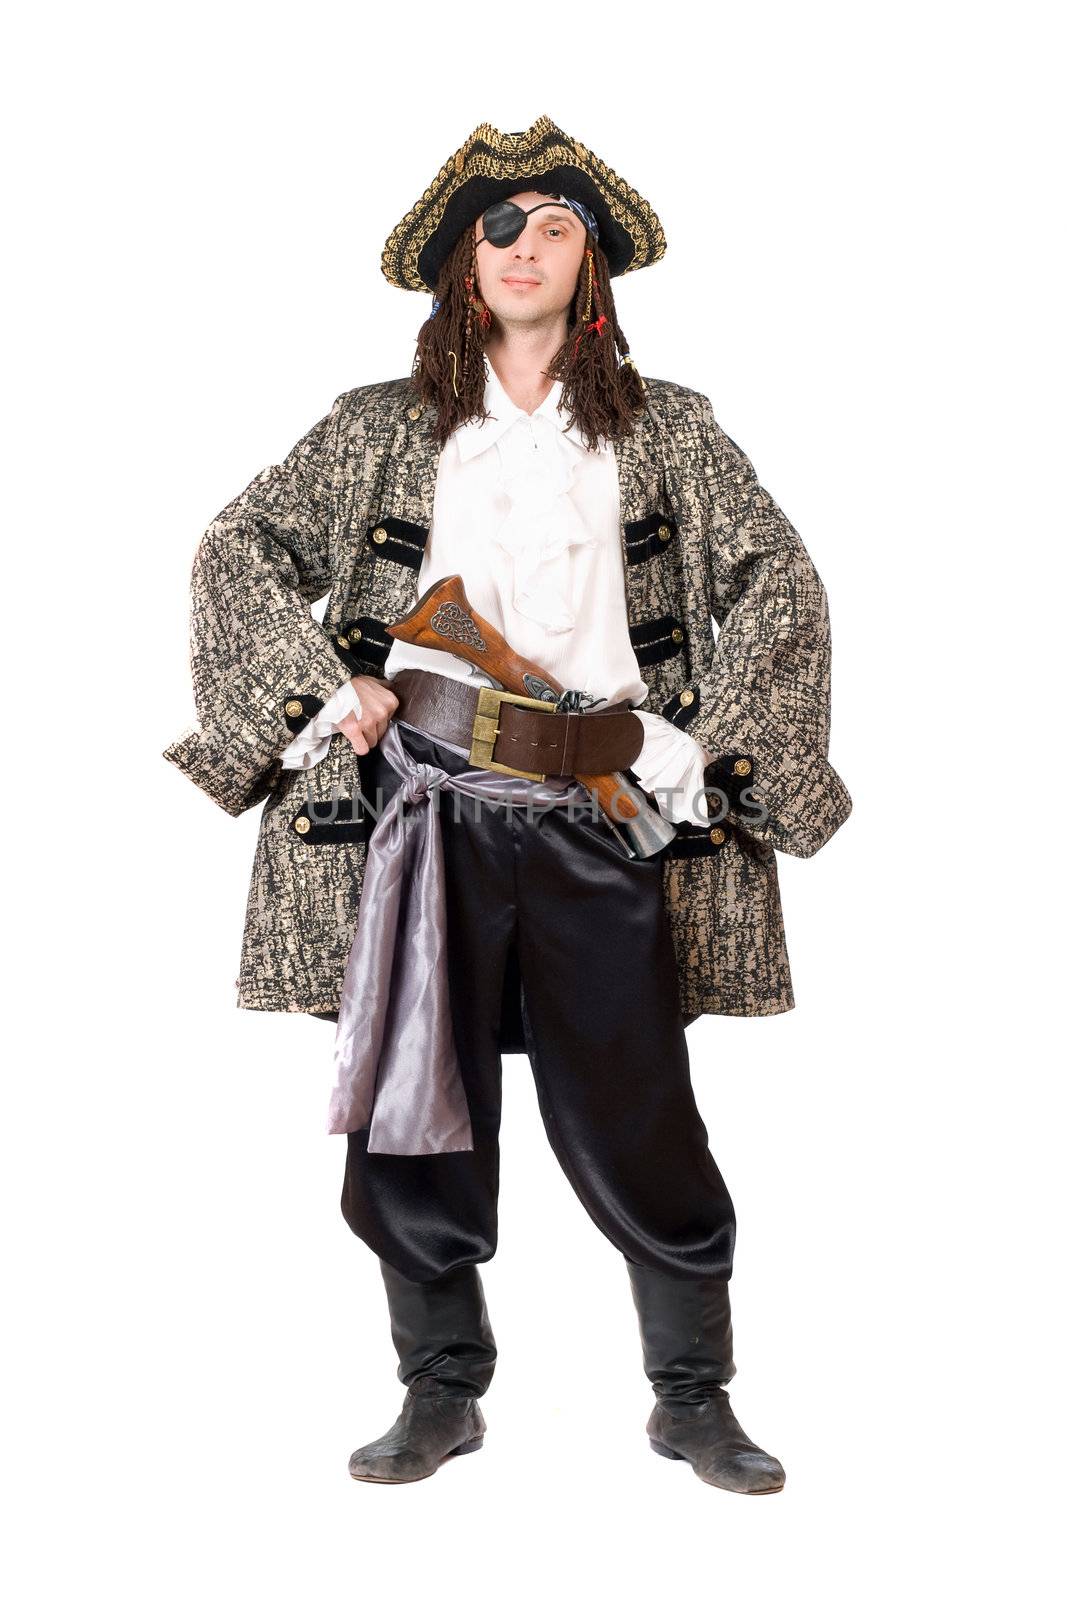 Man dressed as pirate. Isolated on white